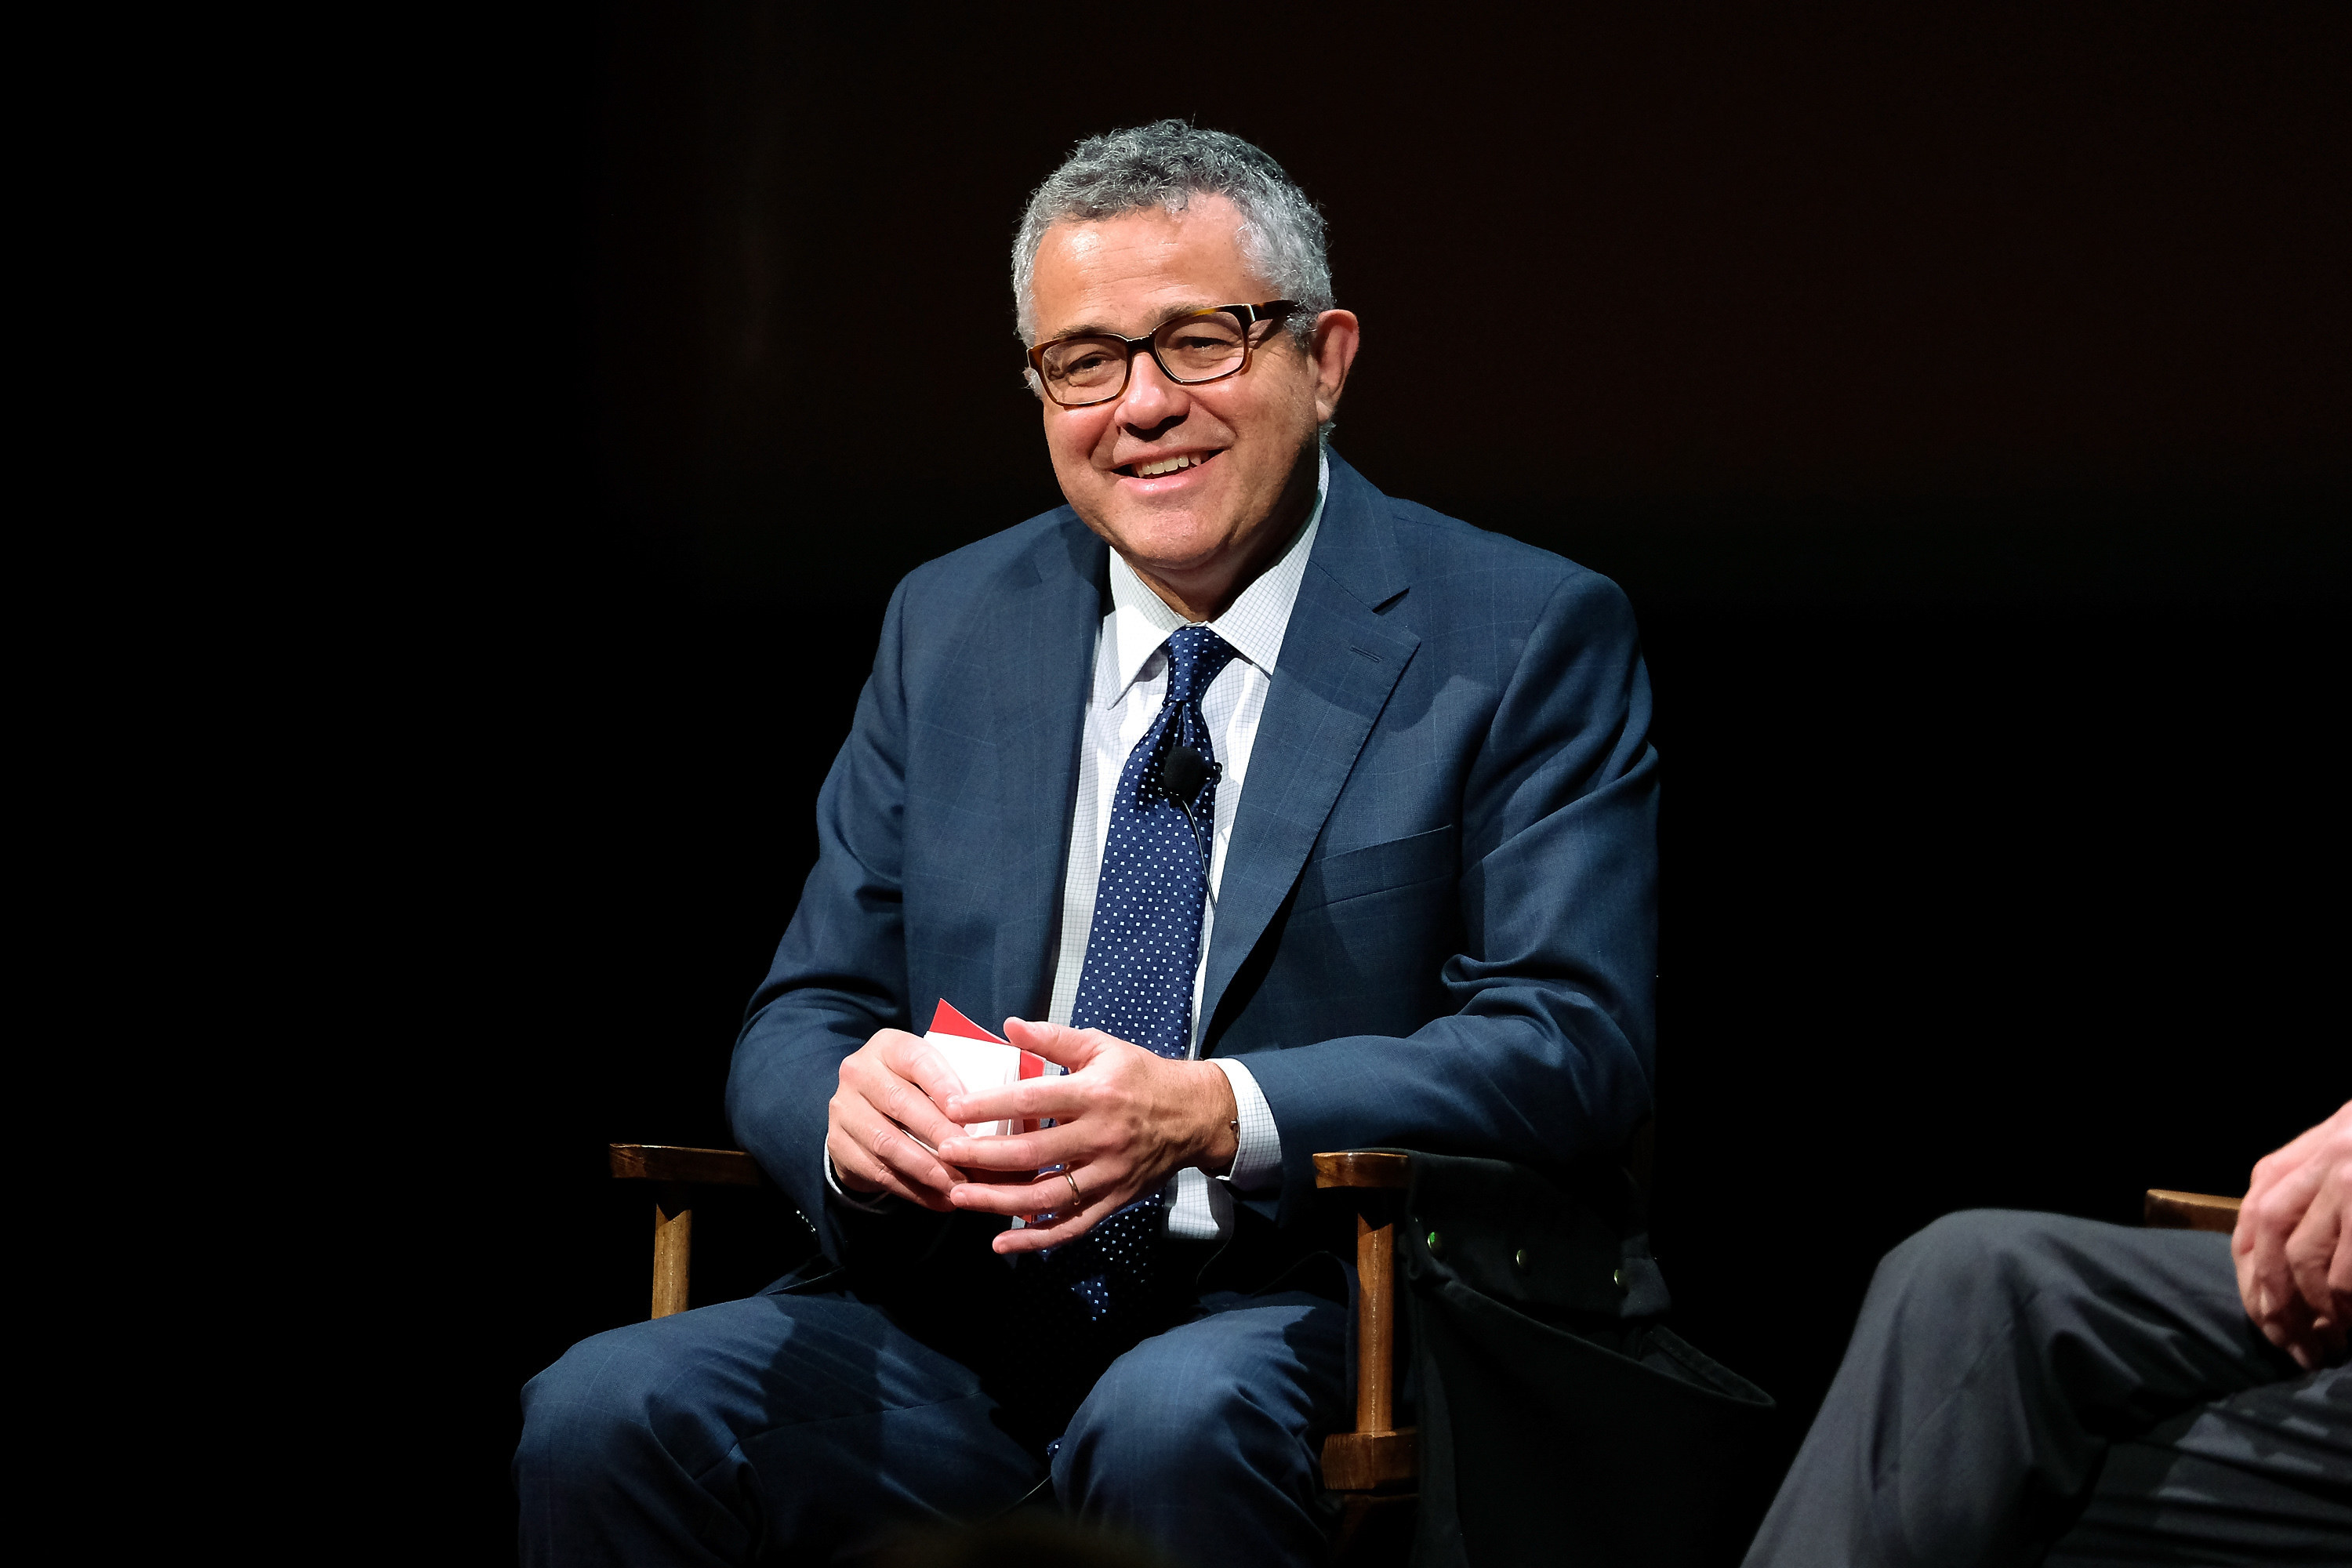 Jeffrey Toobin Can't Be The Only Person Masturbating On Work Zoom Calls